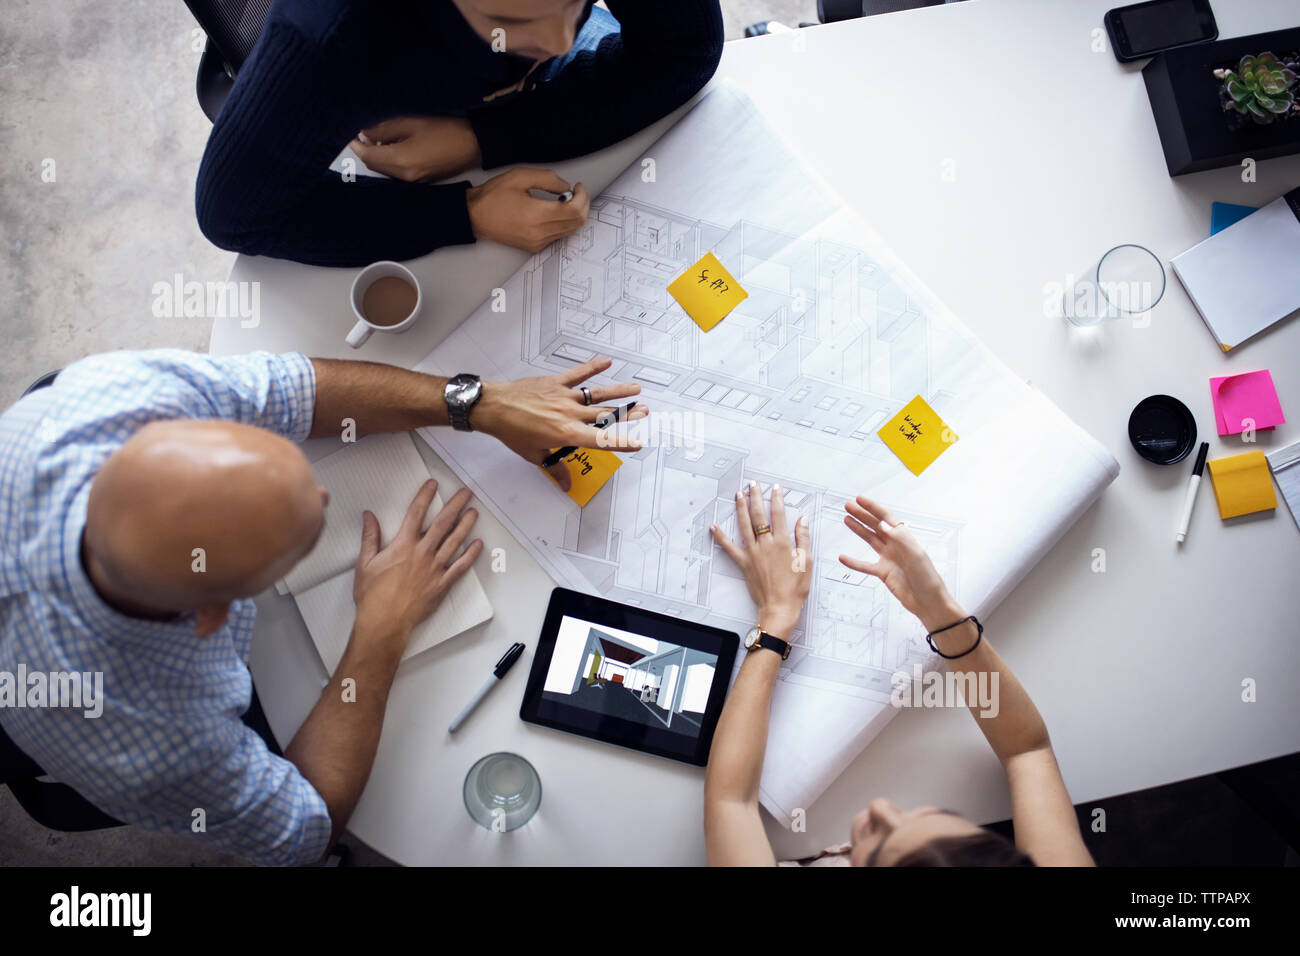 Overhead view of architects discussing over blueprints and digital tablet at creative office Stock Photo